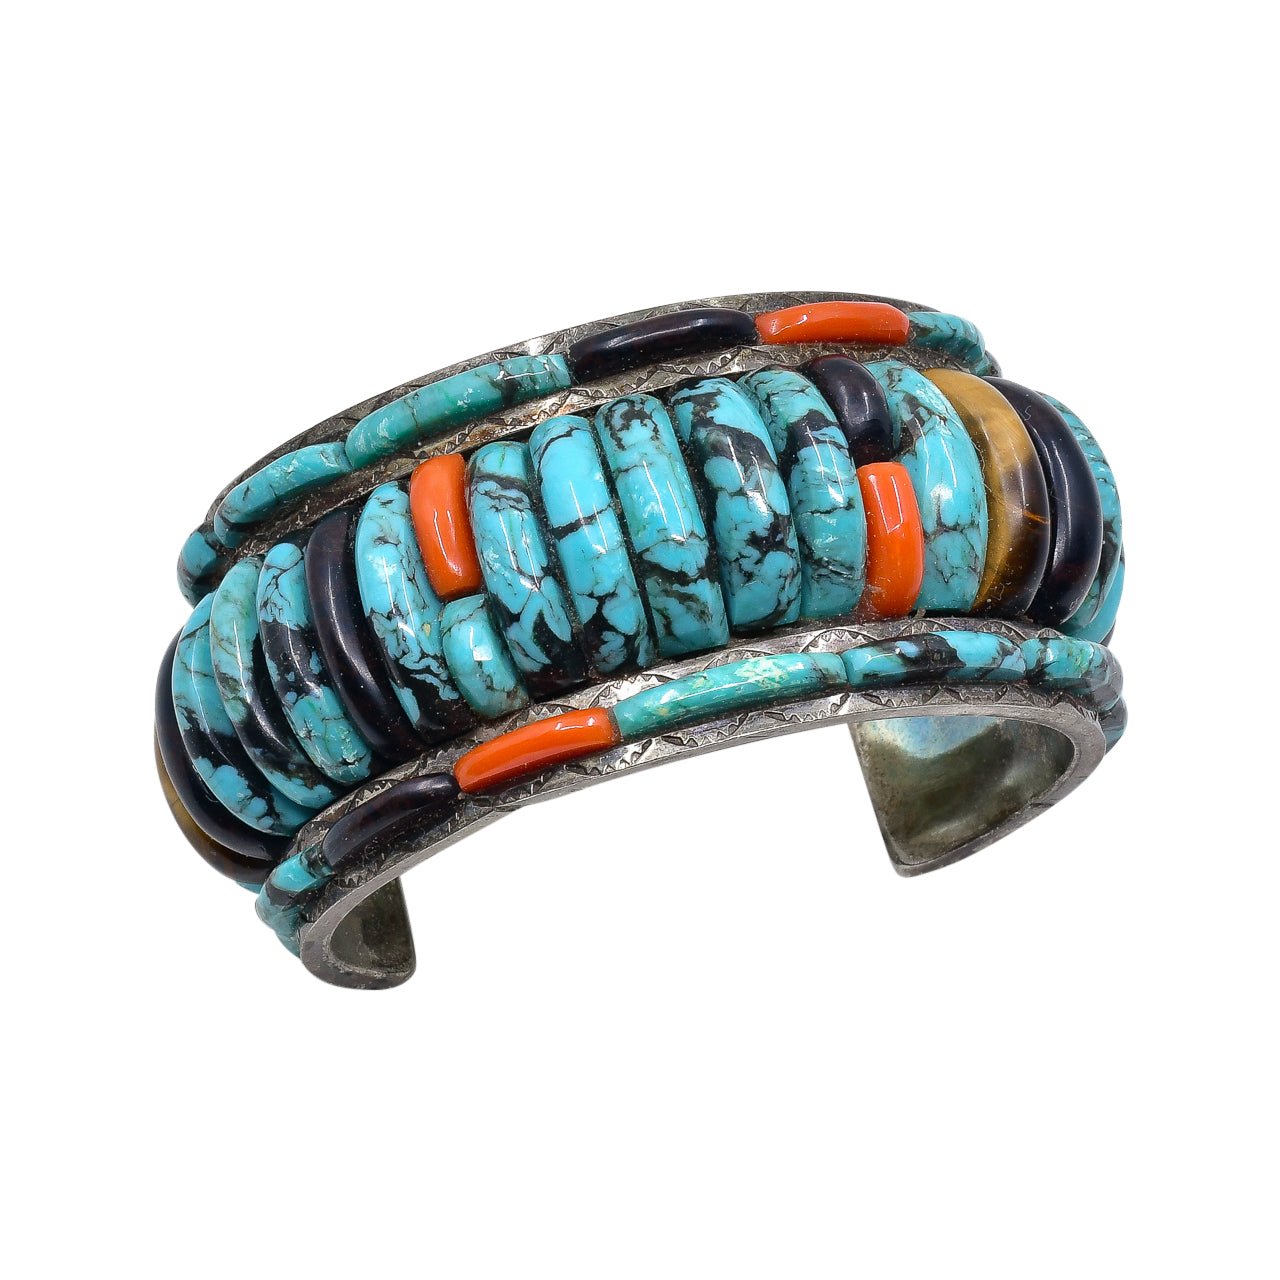 Rare Vintage Kewa Bracelet of Stacked Height Inlay By Carlos Eagle - Turquoise & Tufa